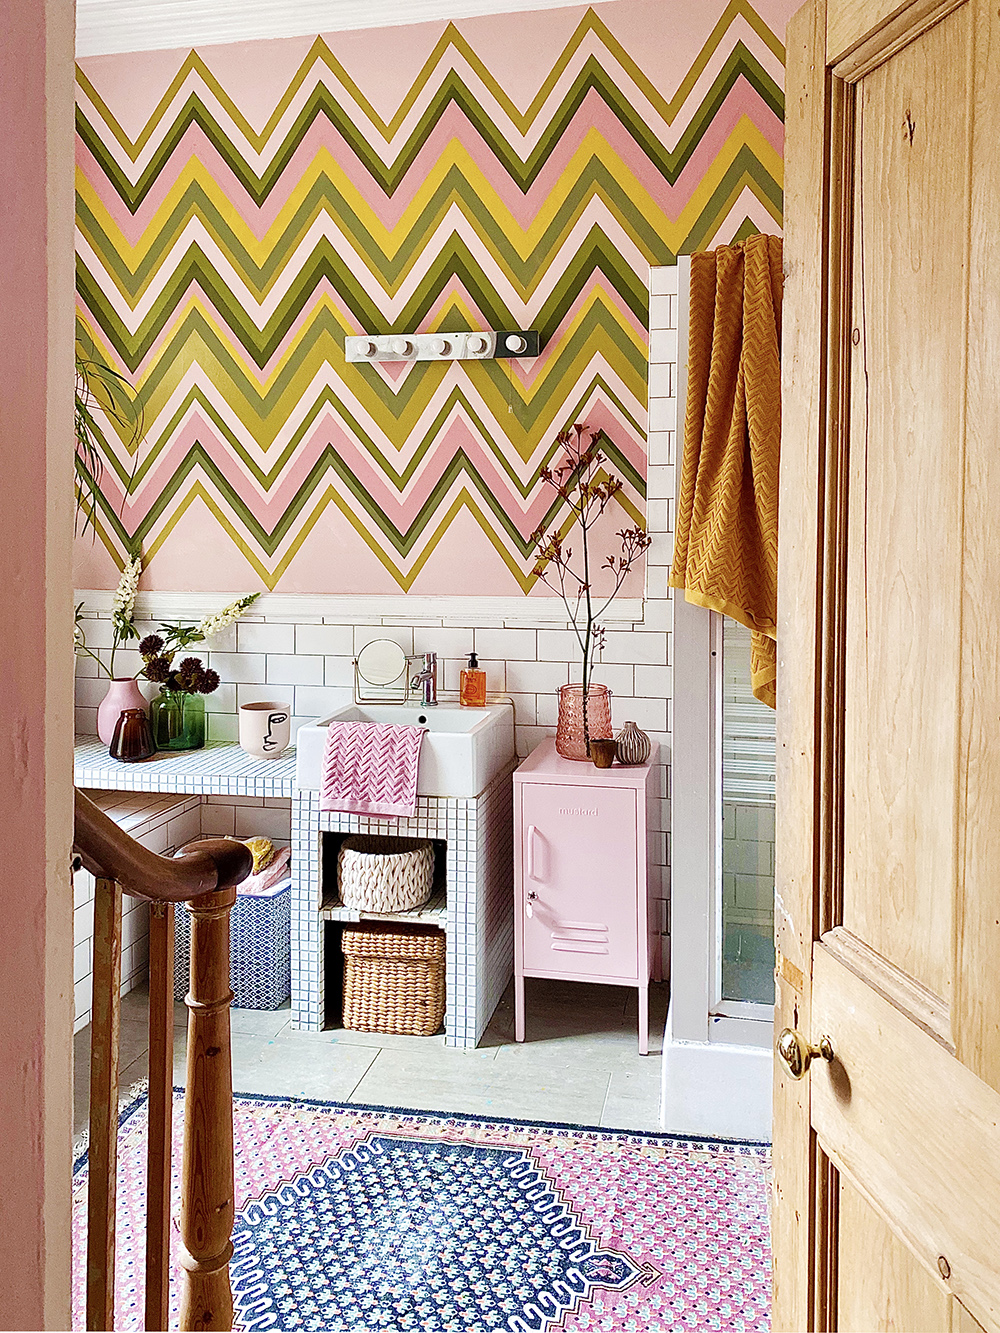 Pink bathroom decor with colourful zig zag wall mural